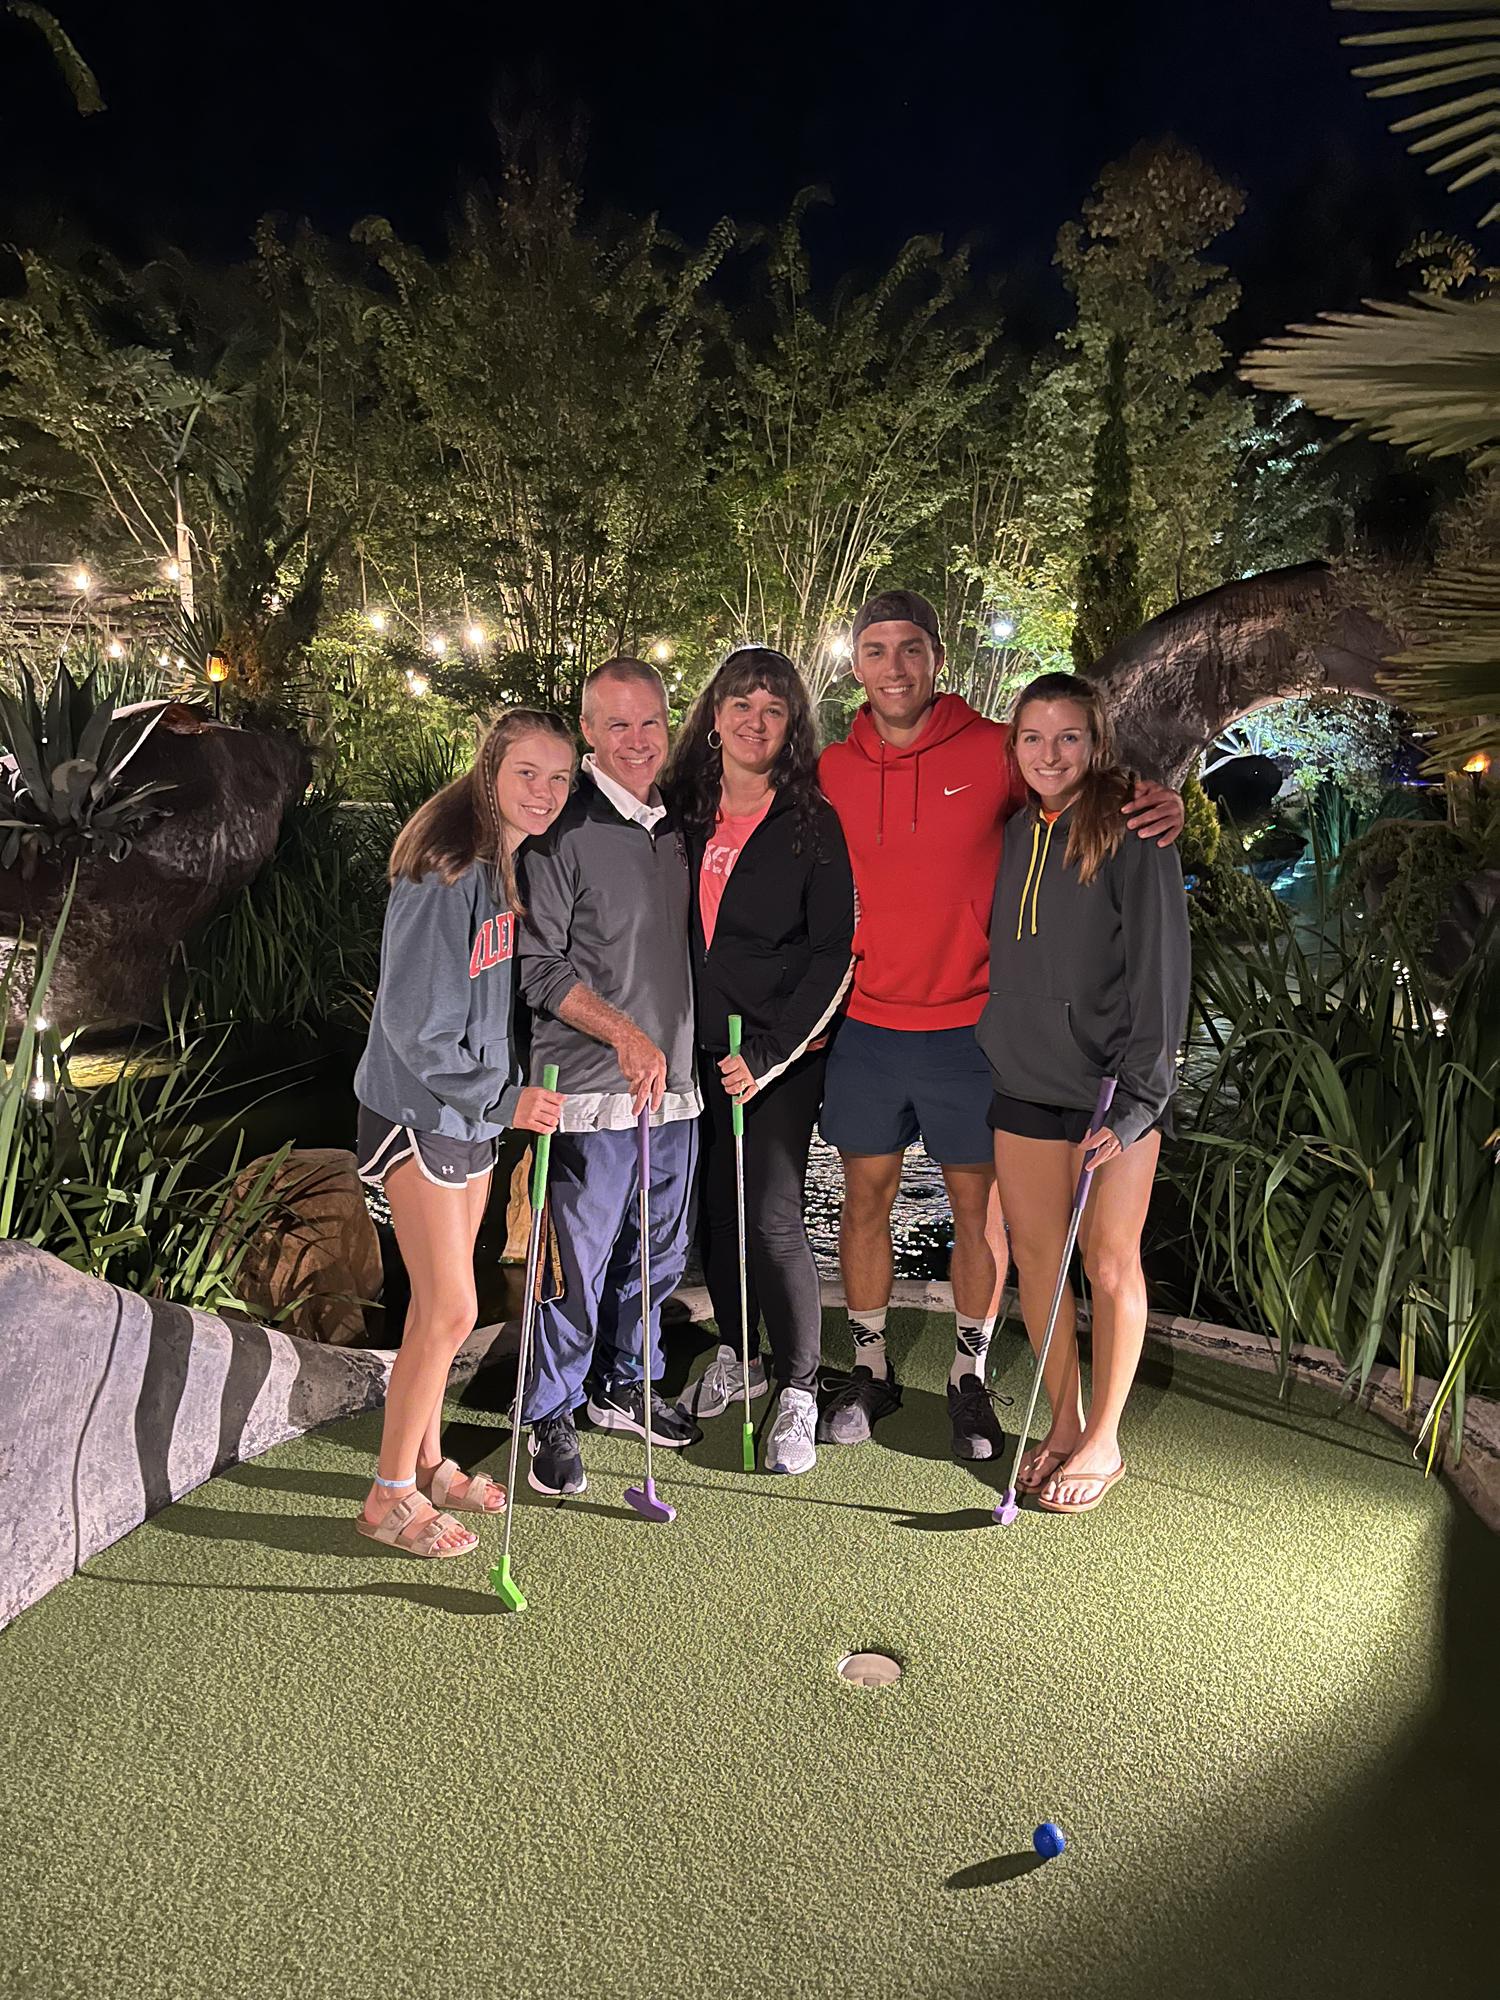 Mini-golf with the Johnson family